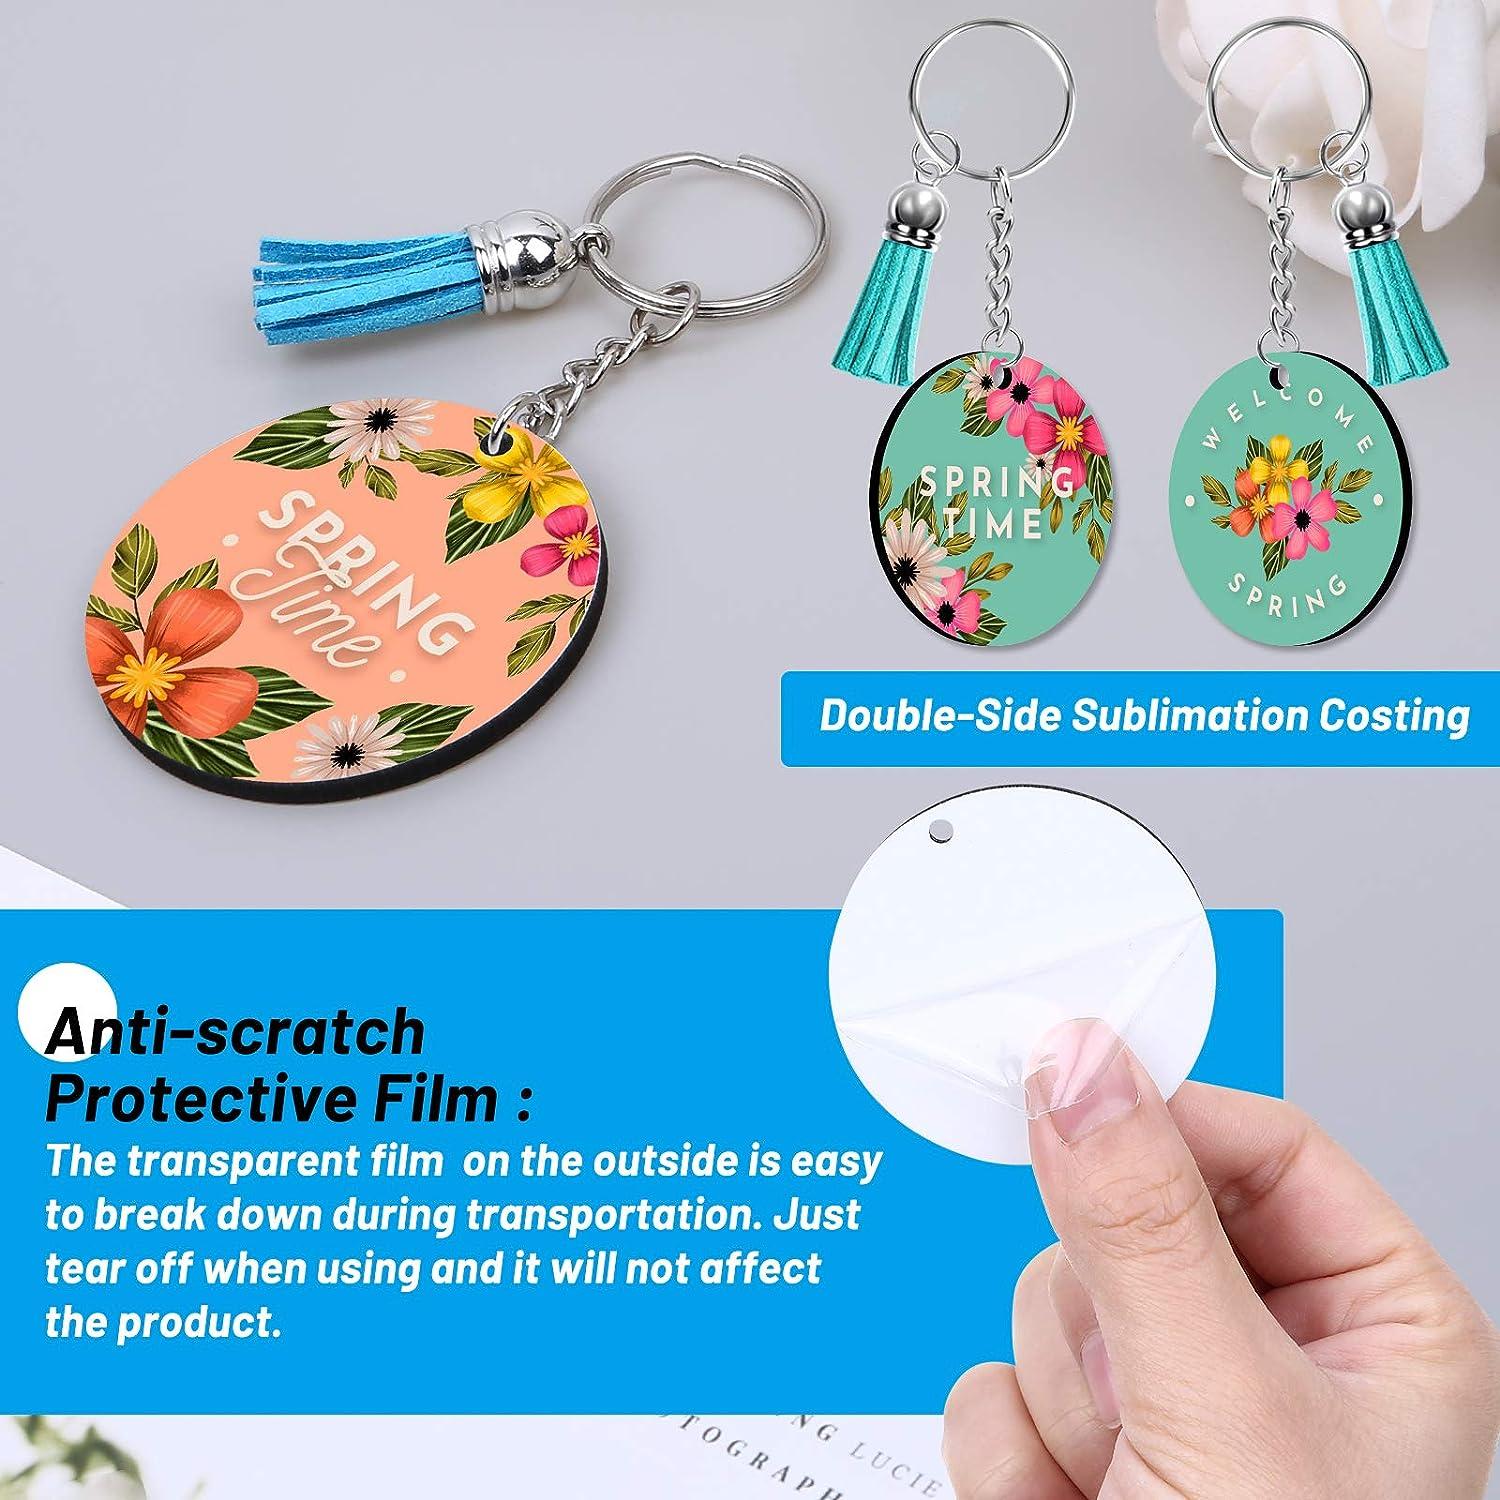 Cruzix Sublimation Blanks Keychains Products, 80 Pcs Keychains Tag Bulk with 2 inch Heat Transfer Double-Side Round Coasters Blanks, Key Chains, Tassels